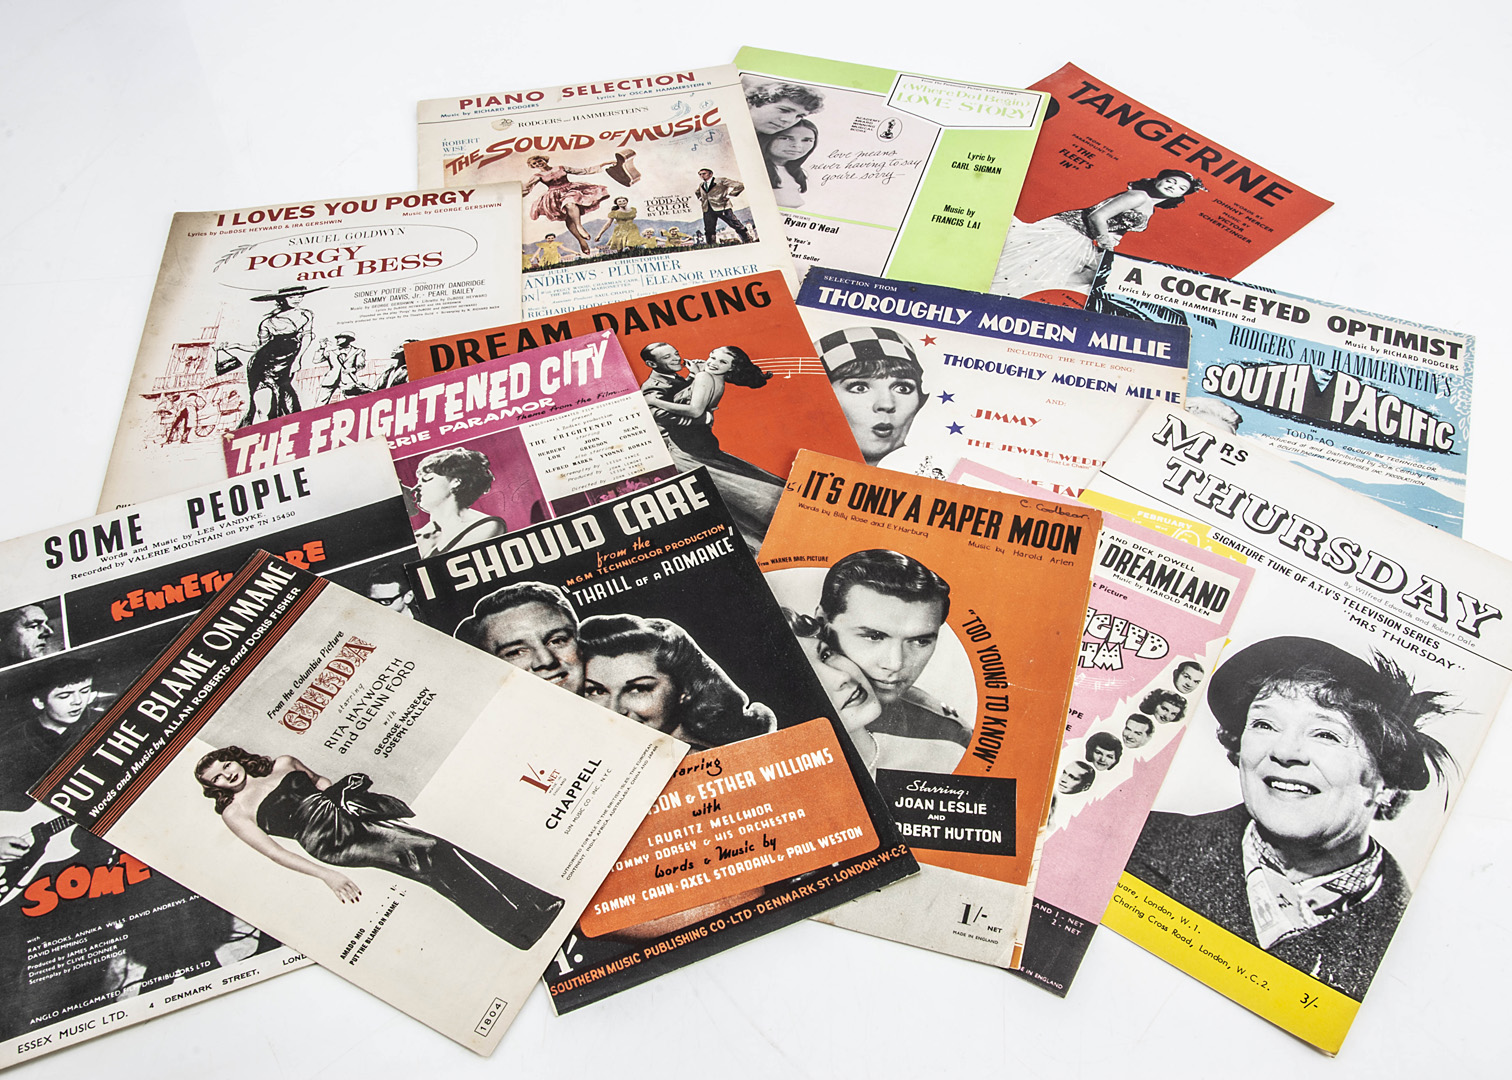 Musicals / Film / TV Sheet Music, approximately five hundred pieces of sheet music mainly relating